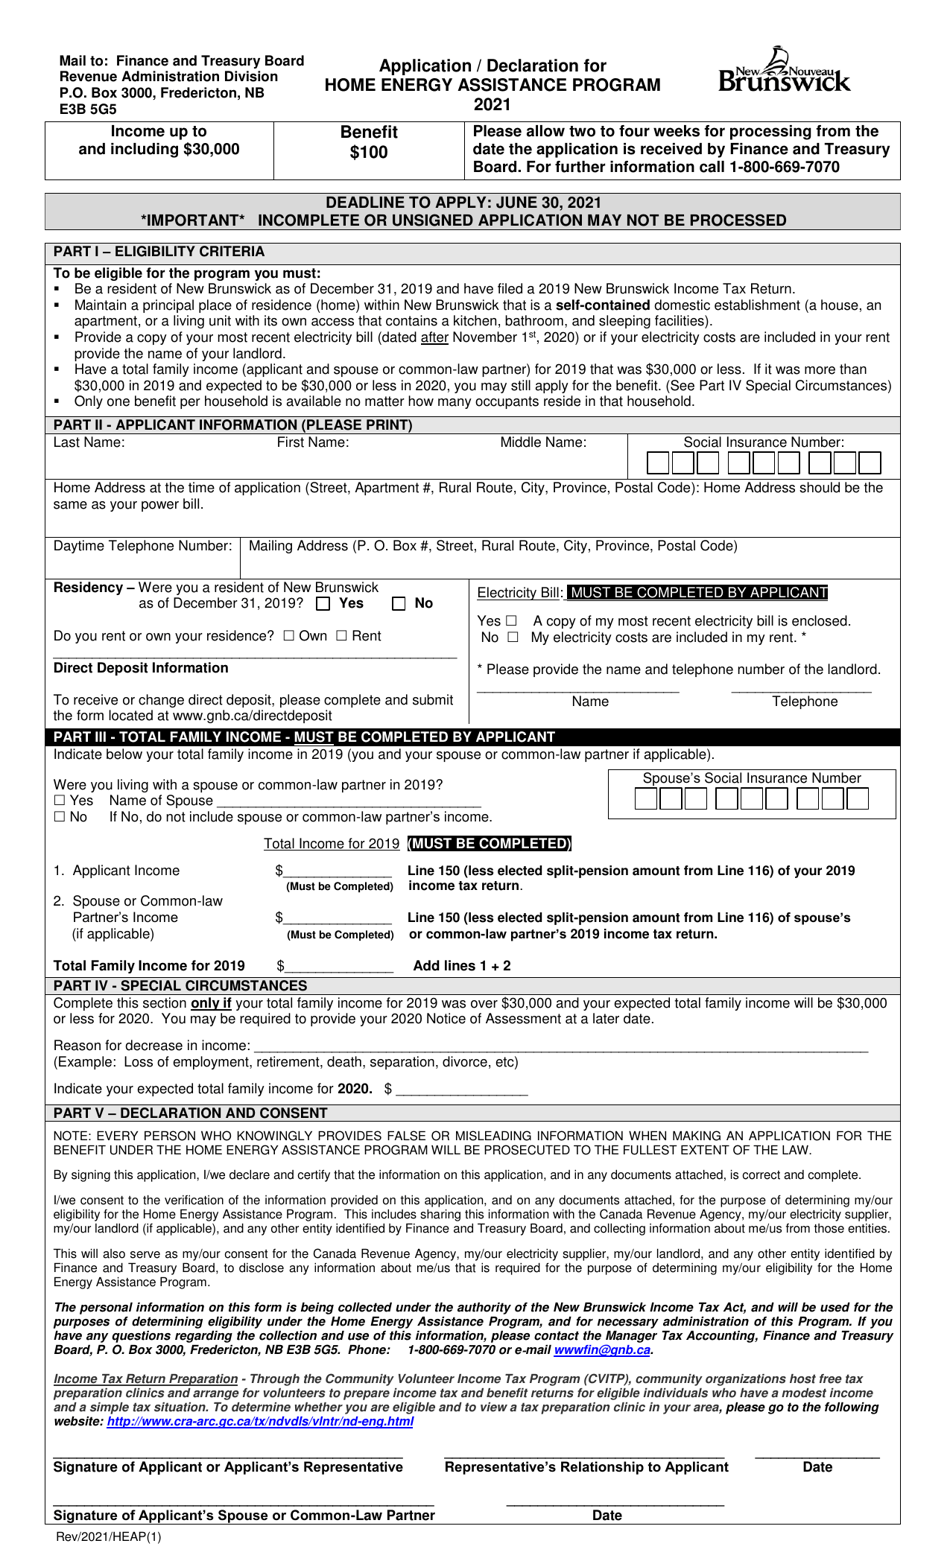 Application / Declaration for Home Energy Assistance Program - New Brunswick, Canada, Page 1